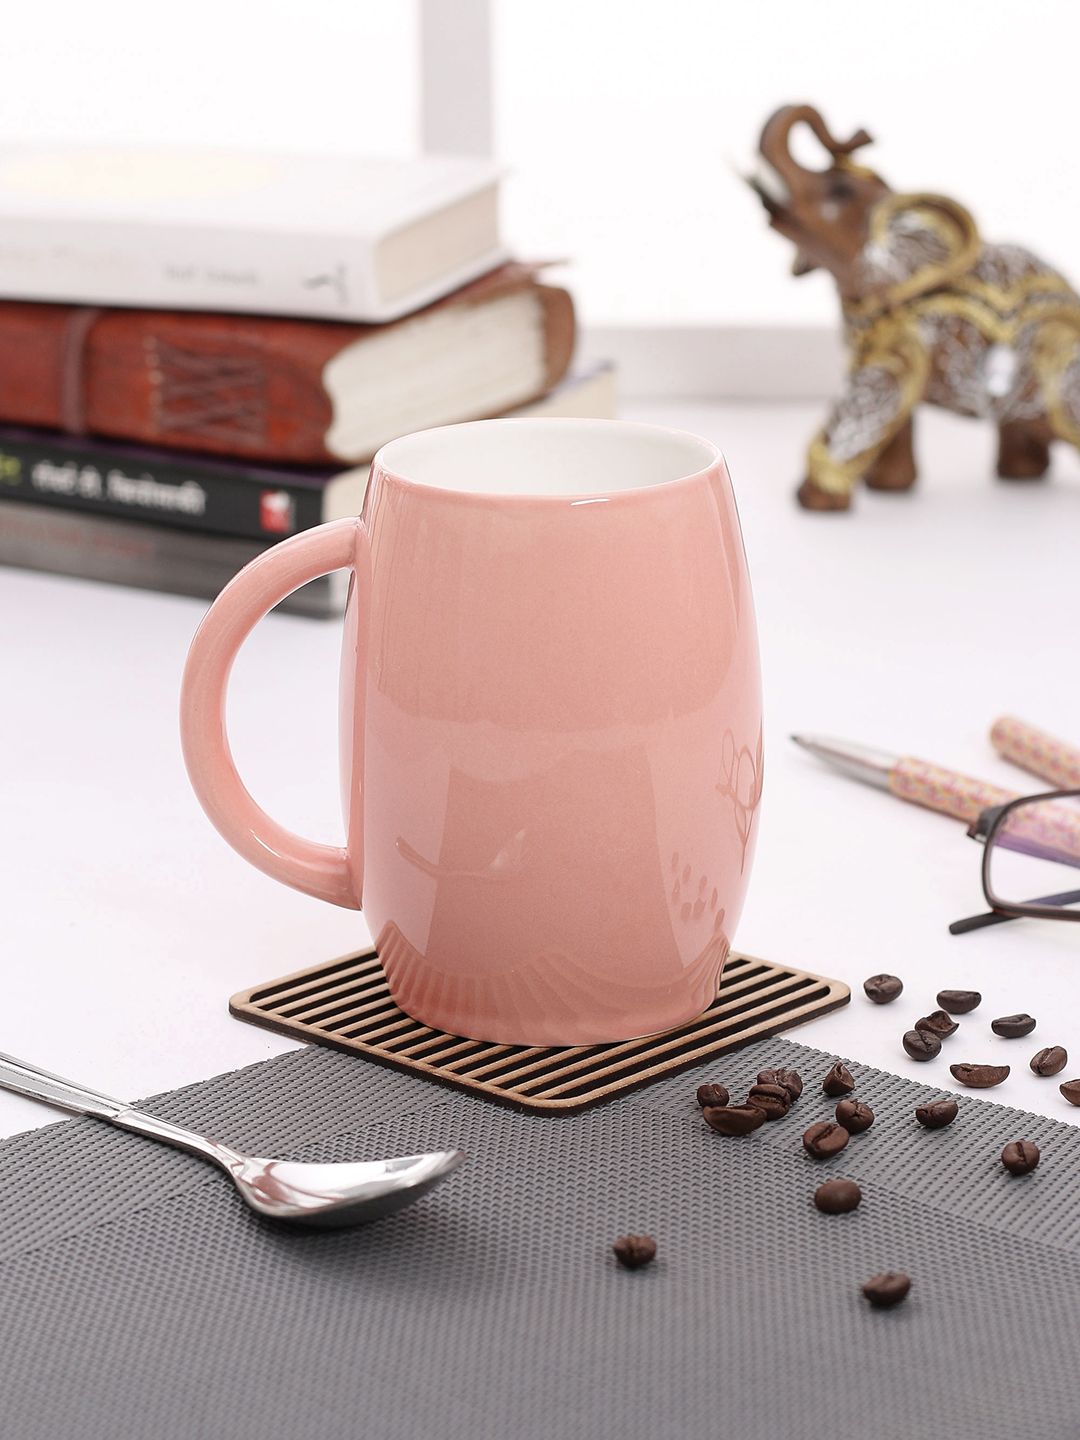 JCPL Peach-Coloured 2-Pieces Solid Porcelain Mugs Set Price in India